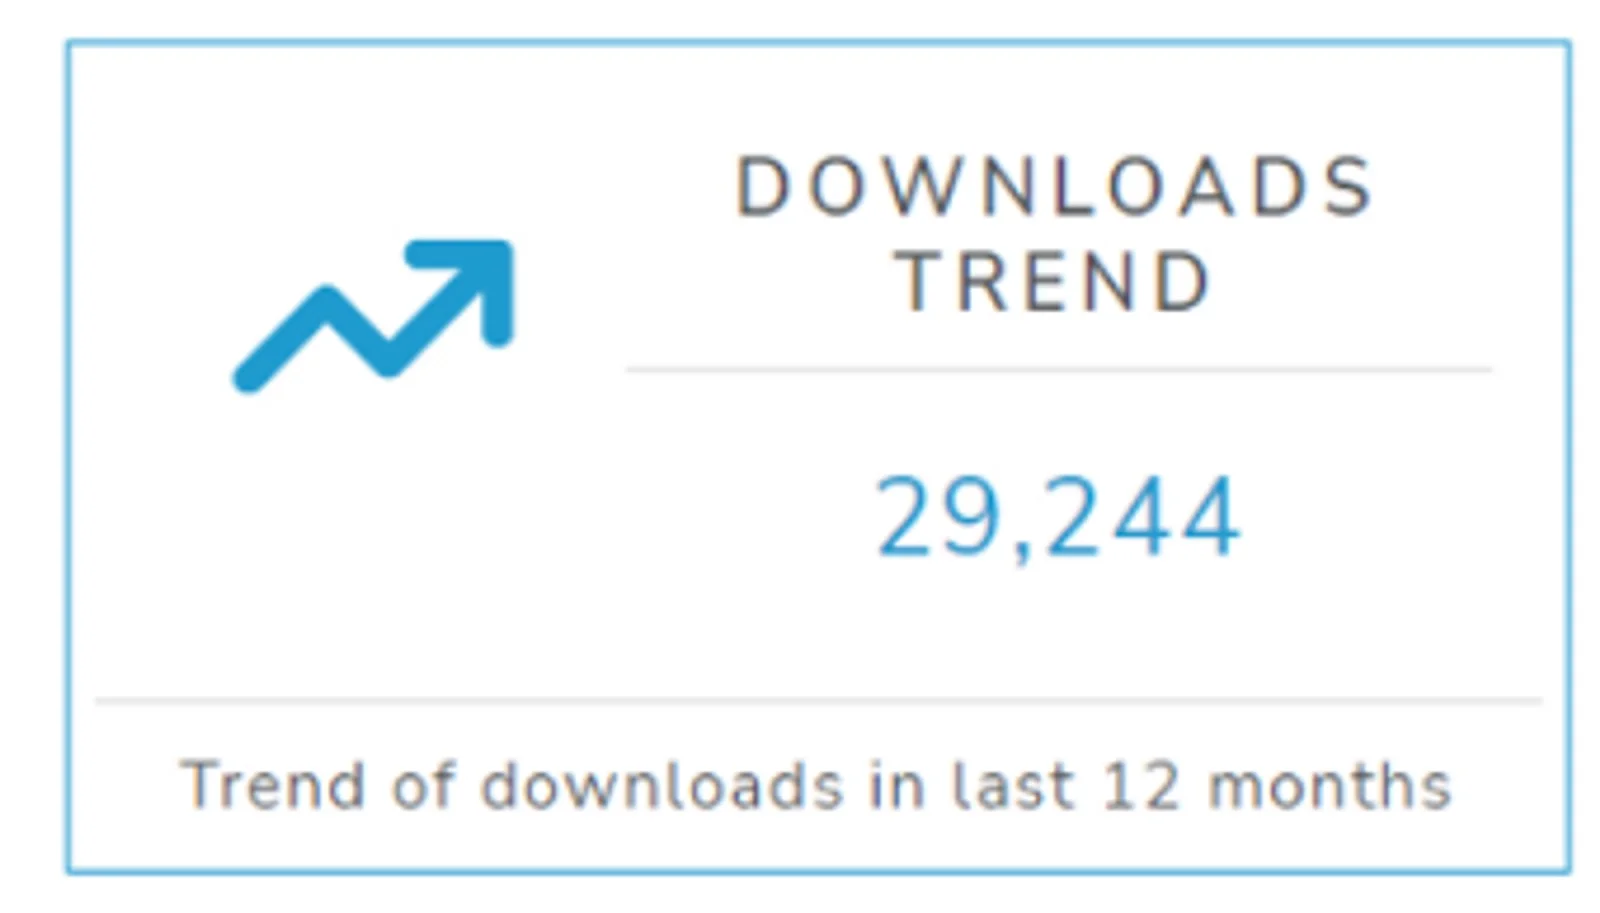 Graphical representation of a download trend metric showing 29,244 downloads for an item in the last 12 months.